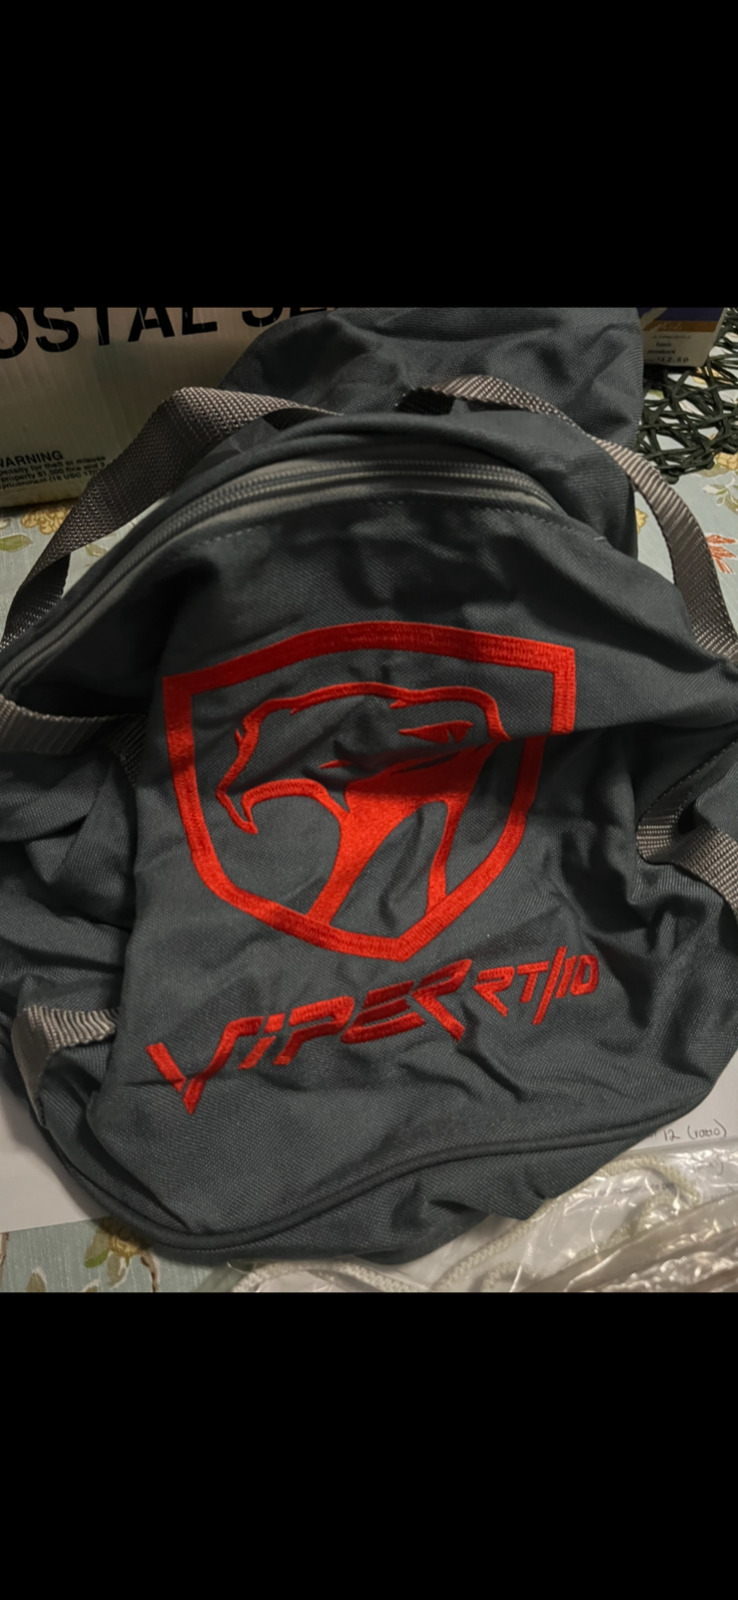 New 1992 2002 OEM DODGE VIPER RT/10 CAR COVER  OEM EMBROIDERED  GENUINE GTS